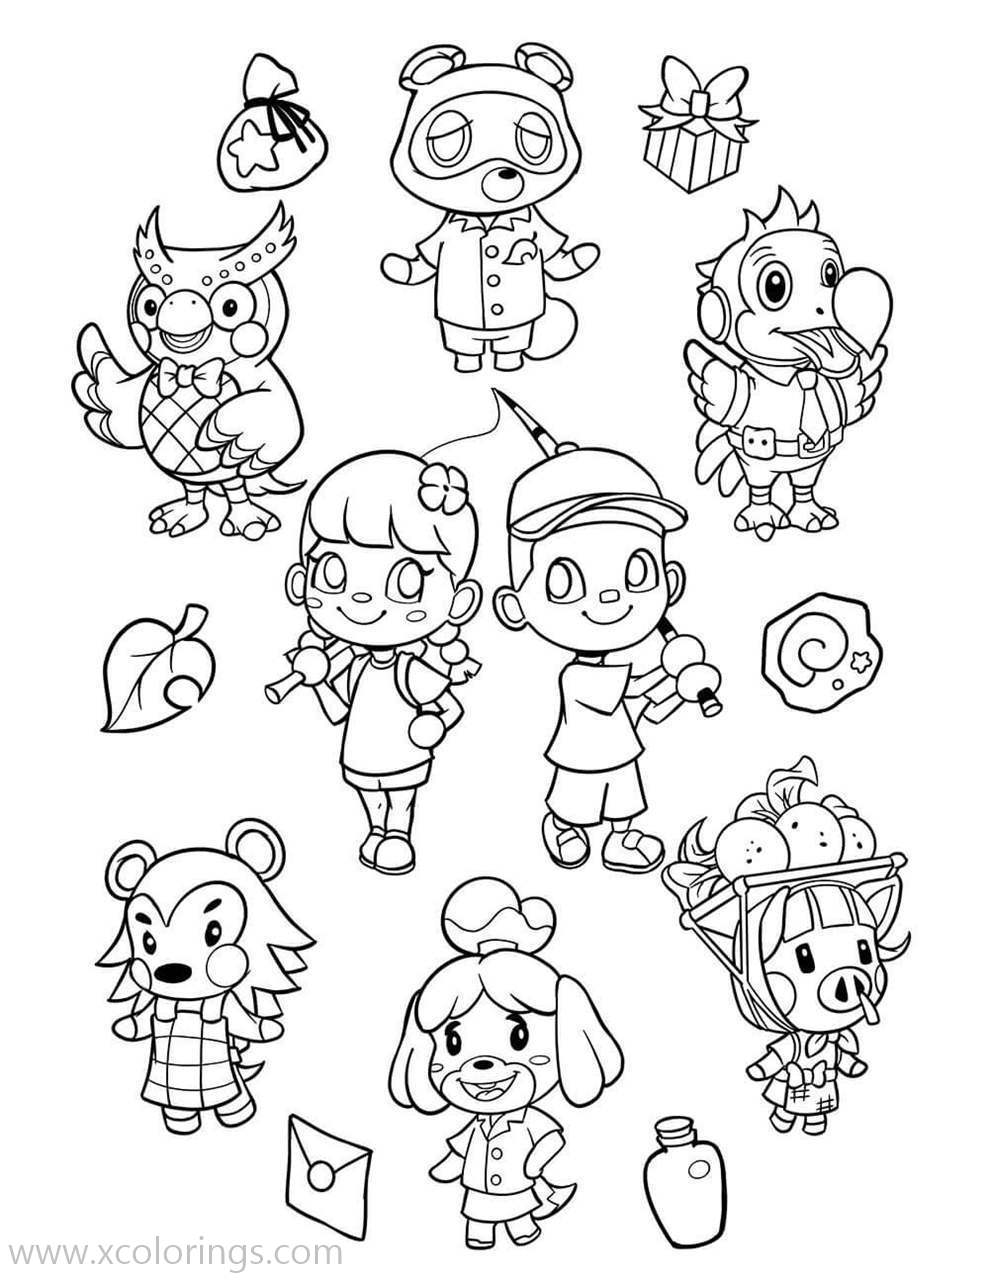 Free Animal Crossing New Horizons Coloring Pages printable